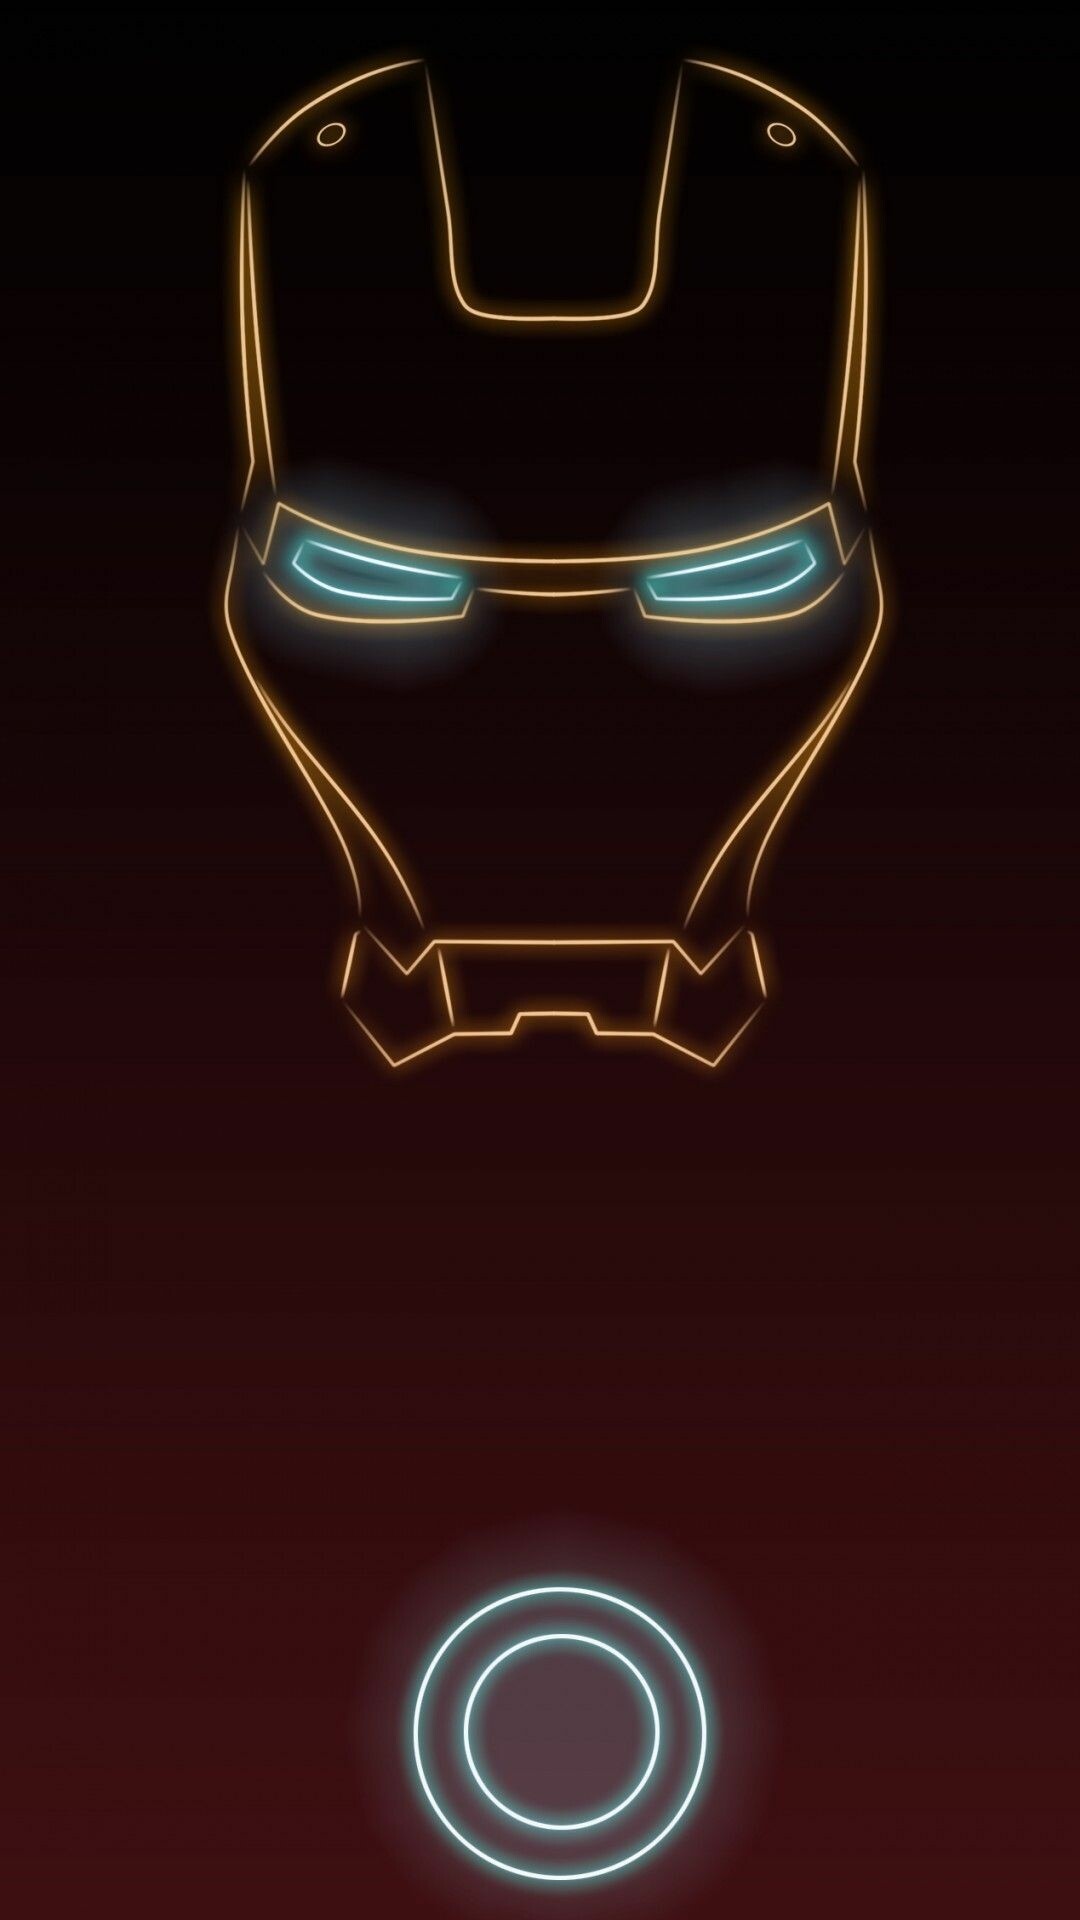 Iron Man wallpapers, HD images, Superhero suit, Free download, 1080x1920 Full HD Handy